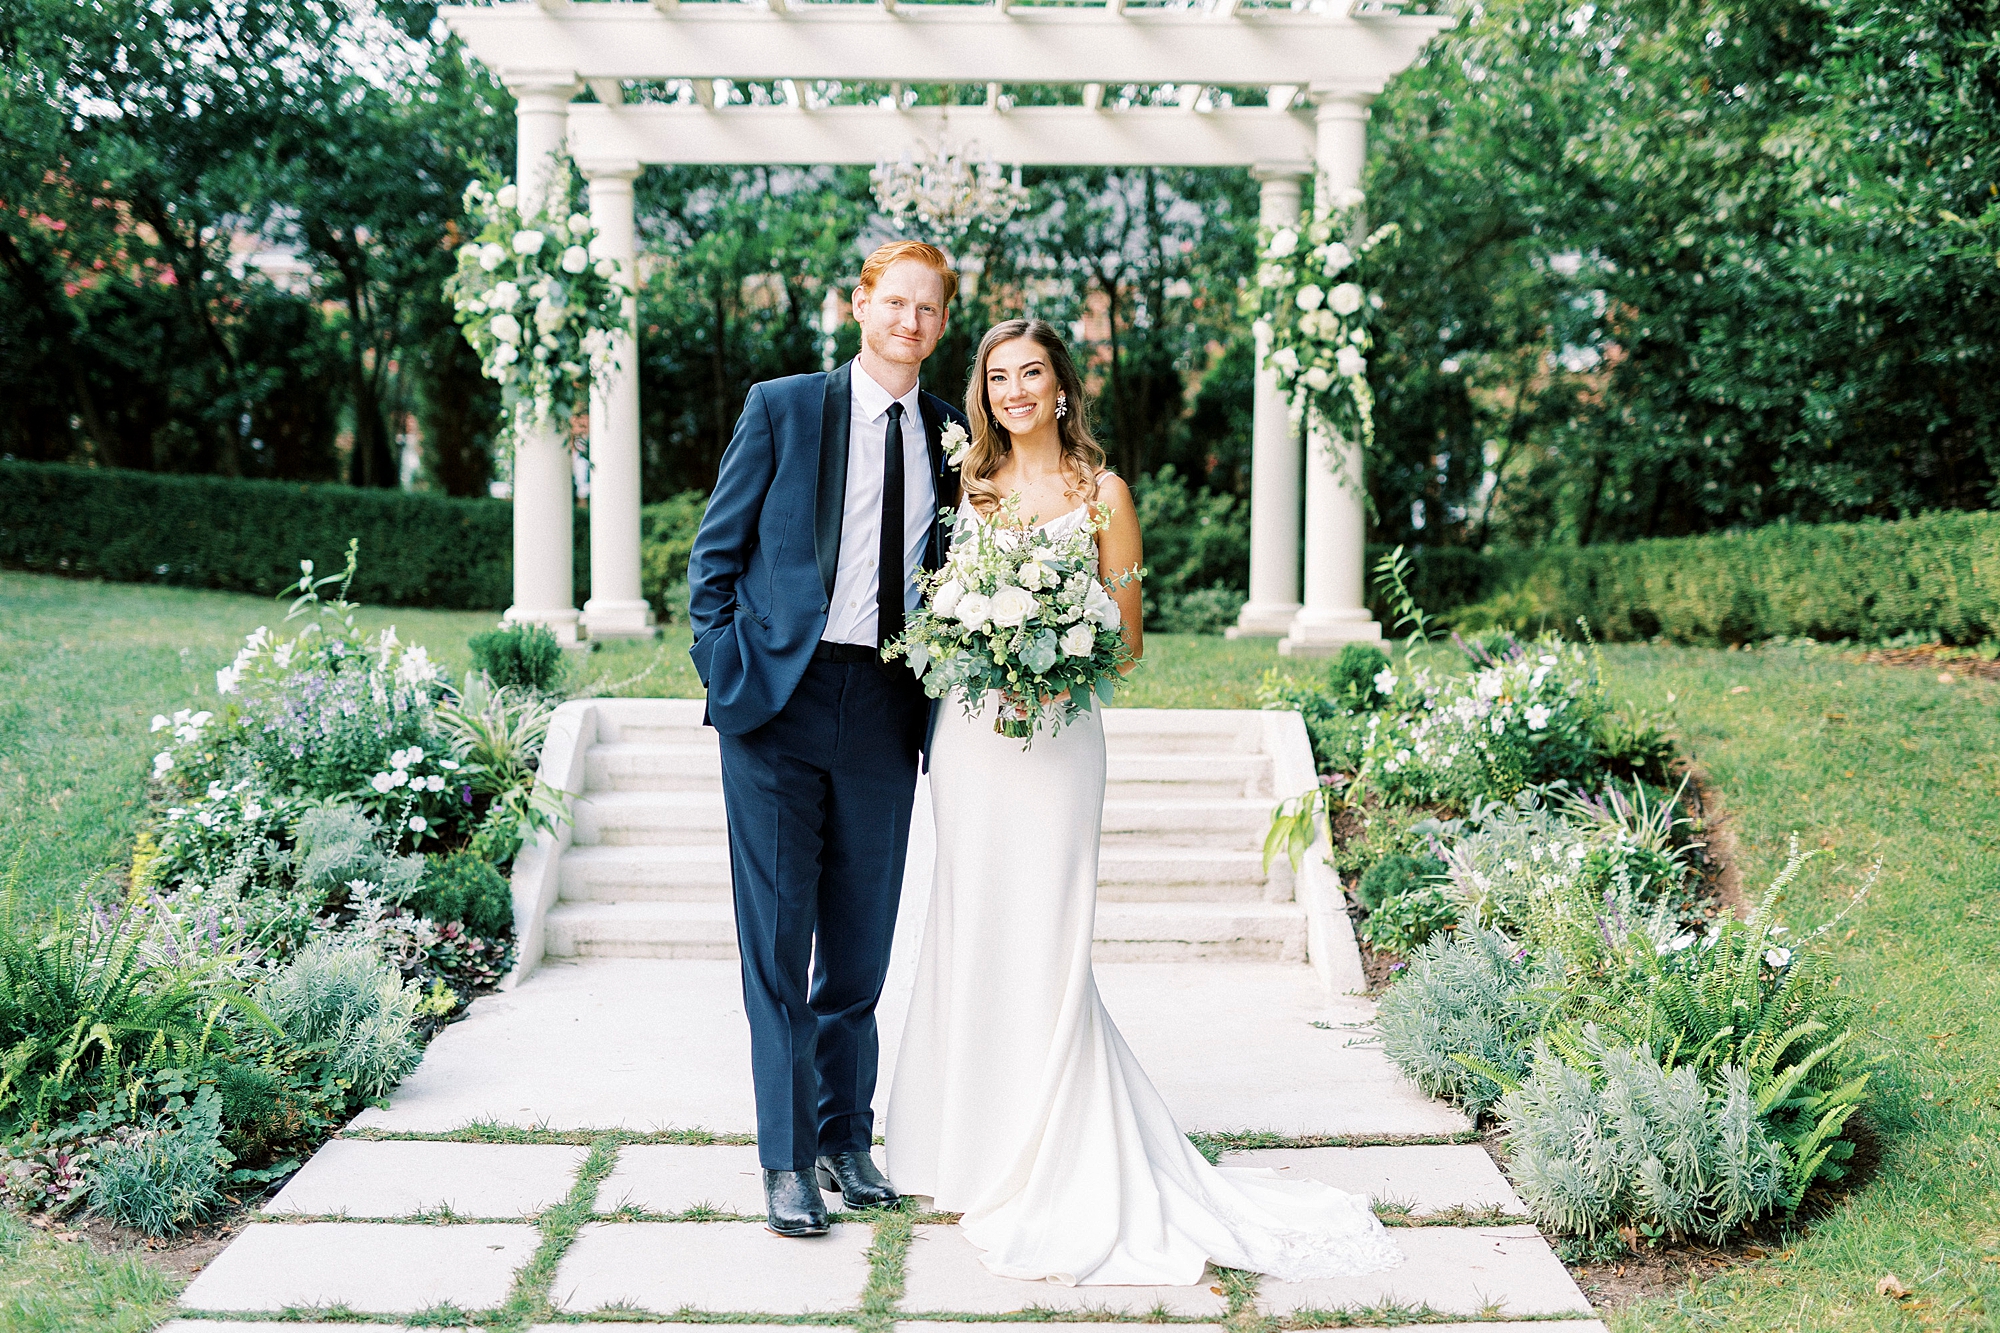 newlyweds hug in front of white arbor with greenery hanging behind them